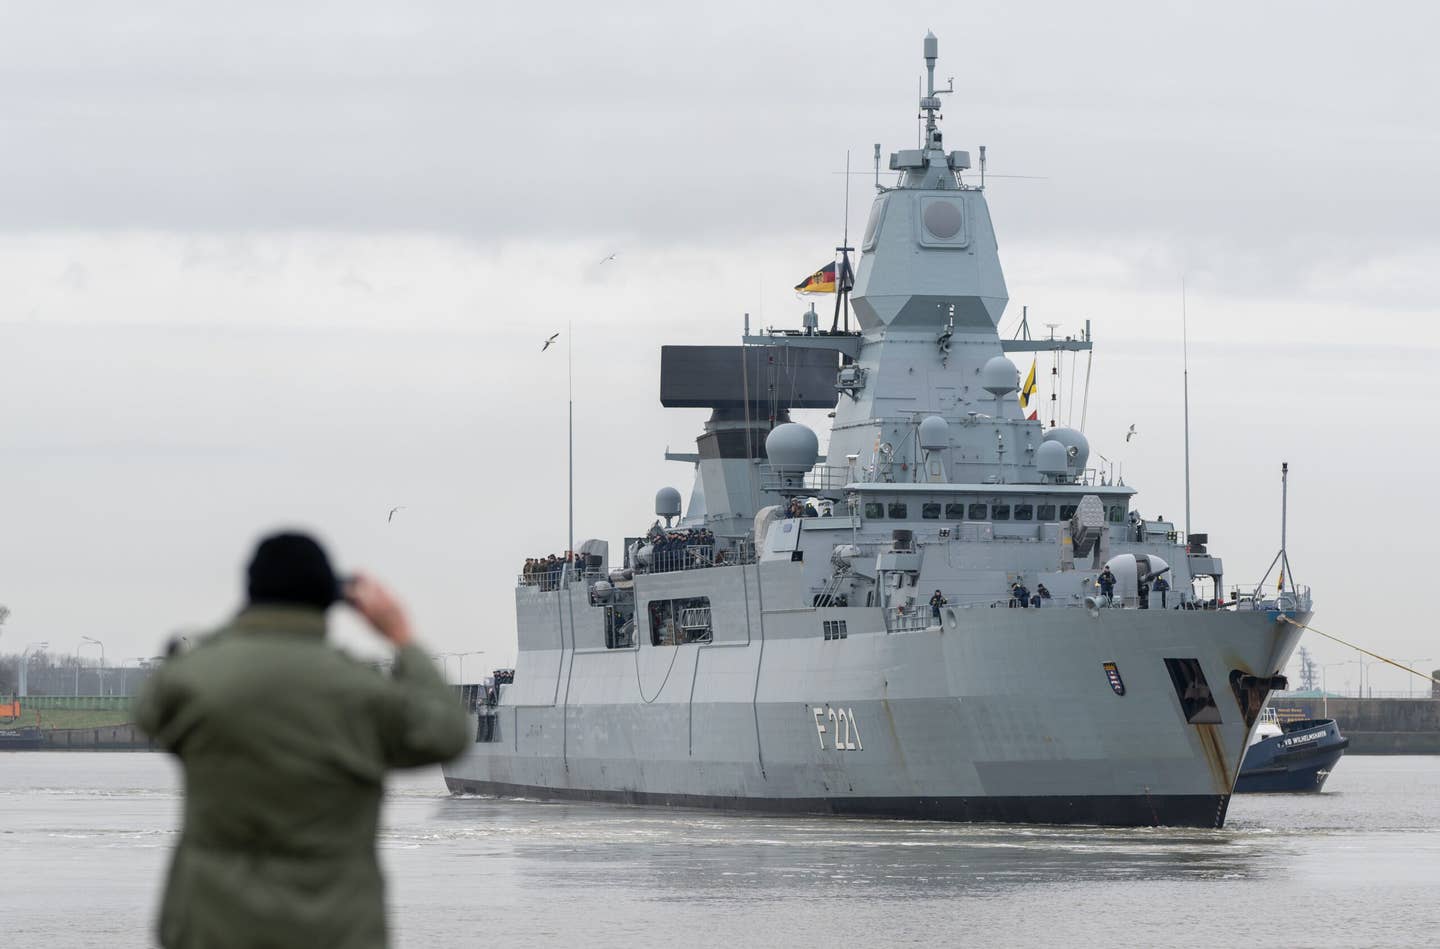 The German Navy frigate "<em>Hessen</em>" during the depart for deployment in the Red Sea on February 8, 2024 in Wilhelmshaven, Germany. <em>Photo by David Hecker/Getty Images</em>